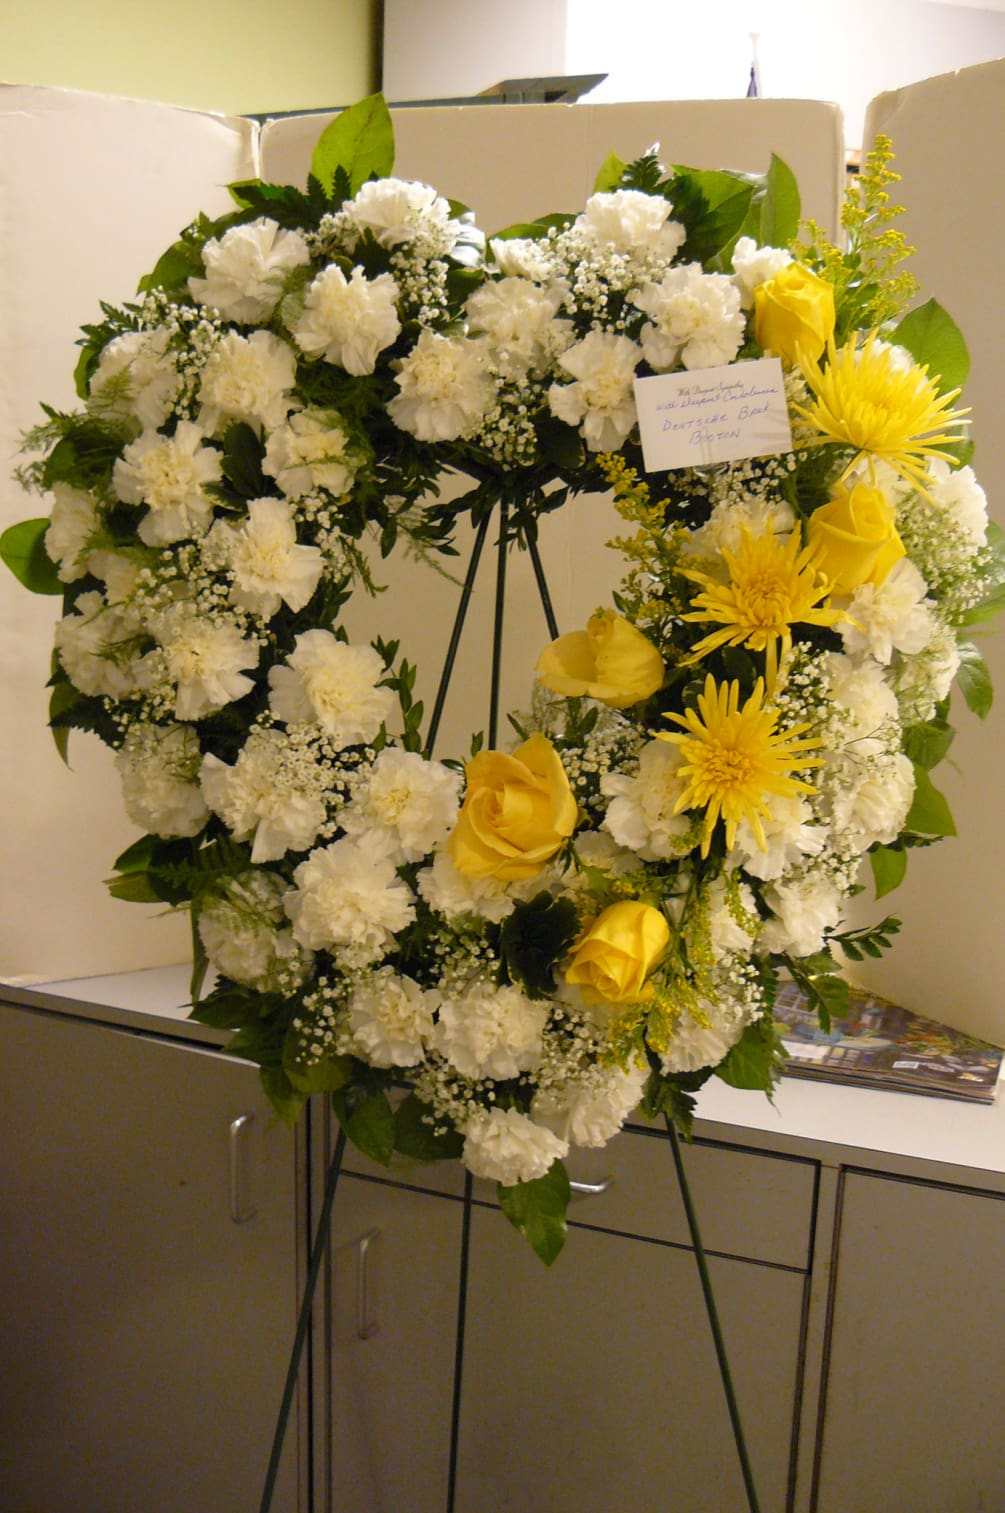 White Carnations, Yellow Roses, Fancy Assorted Greens.